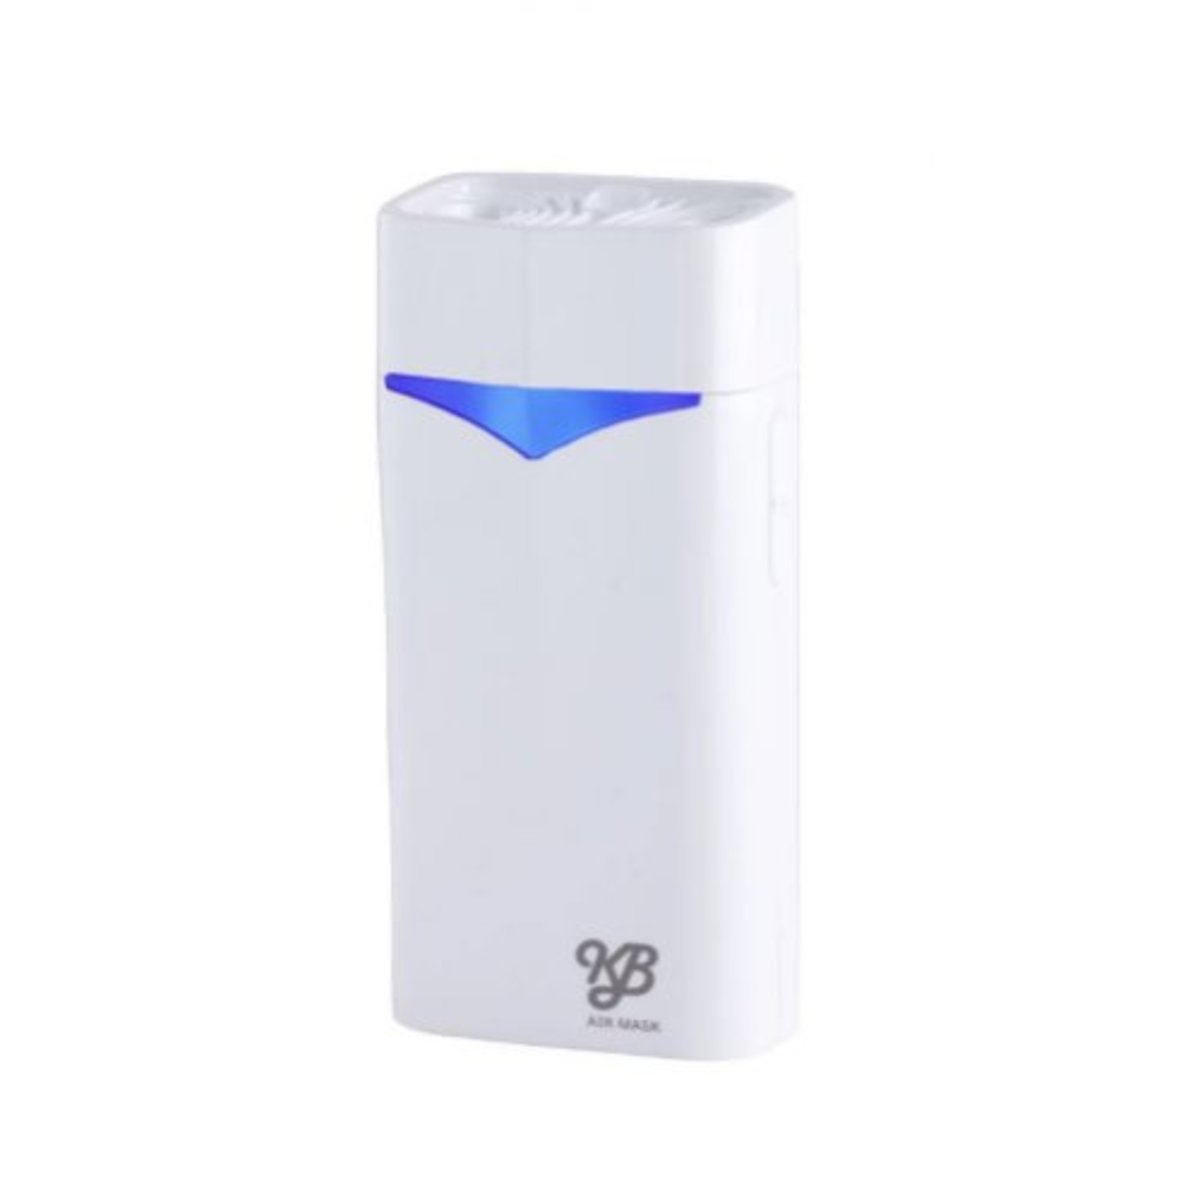 KB - Air Mask Dual Discharge Ion Portable Air Purifier - White [Made in Japan. Hong Kong licensed goods]